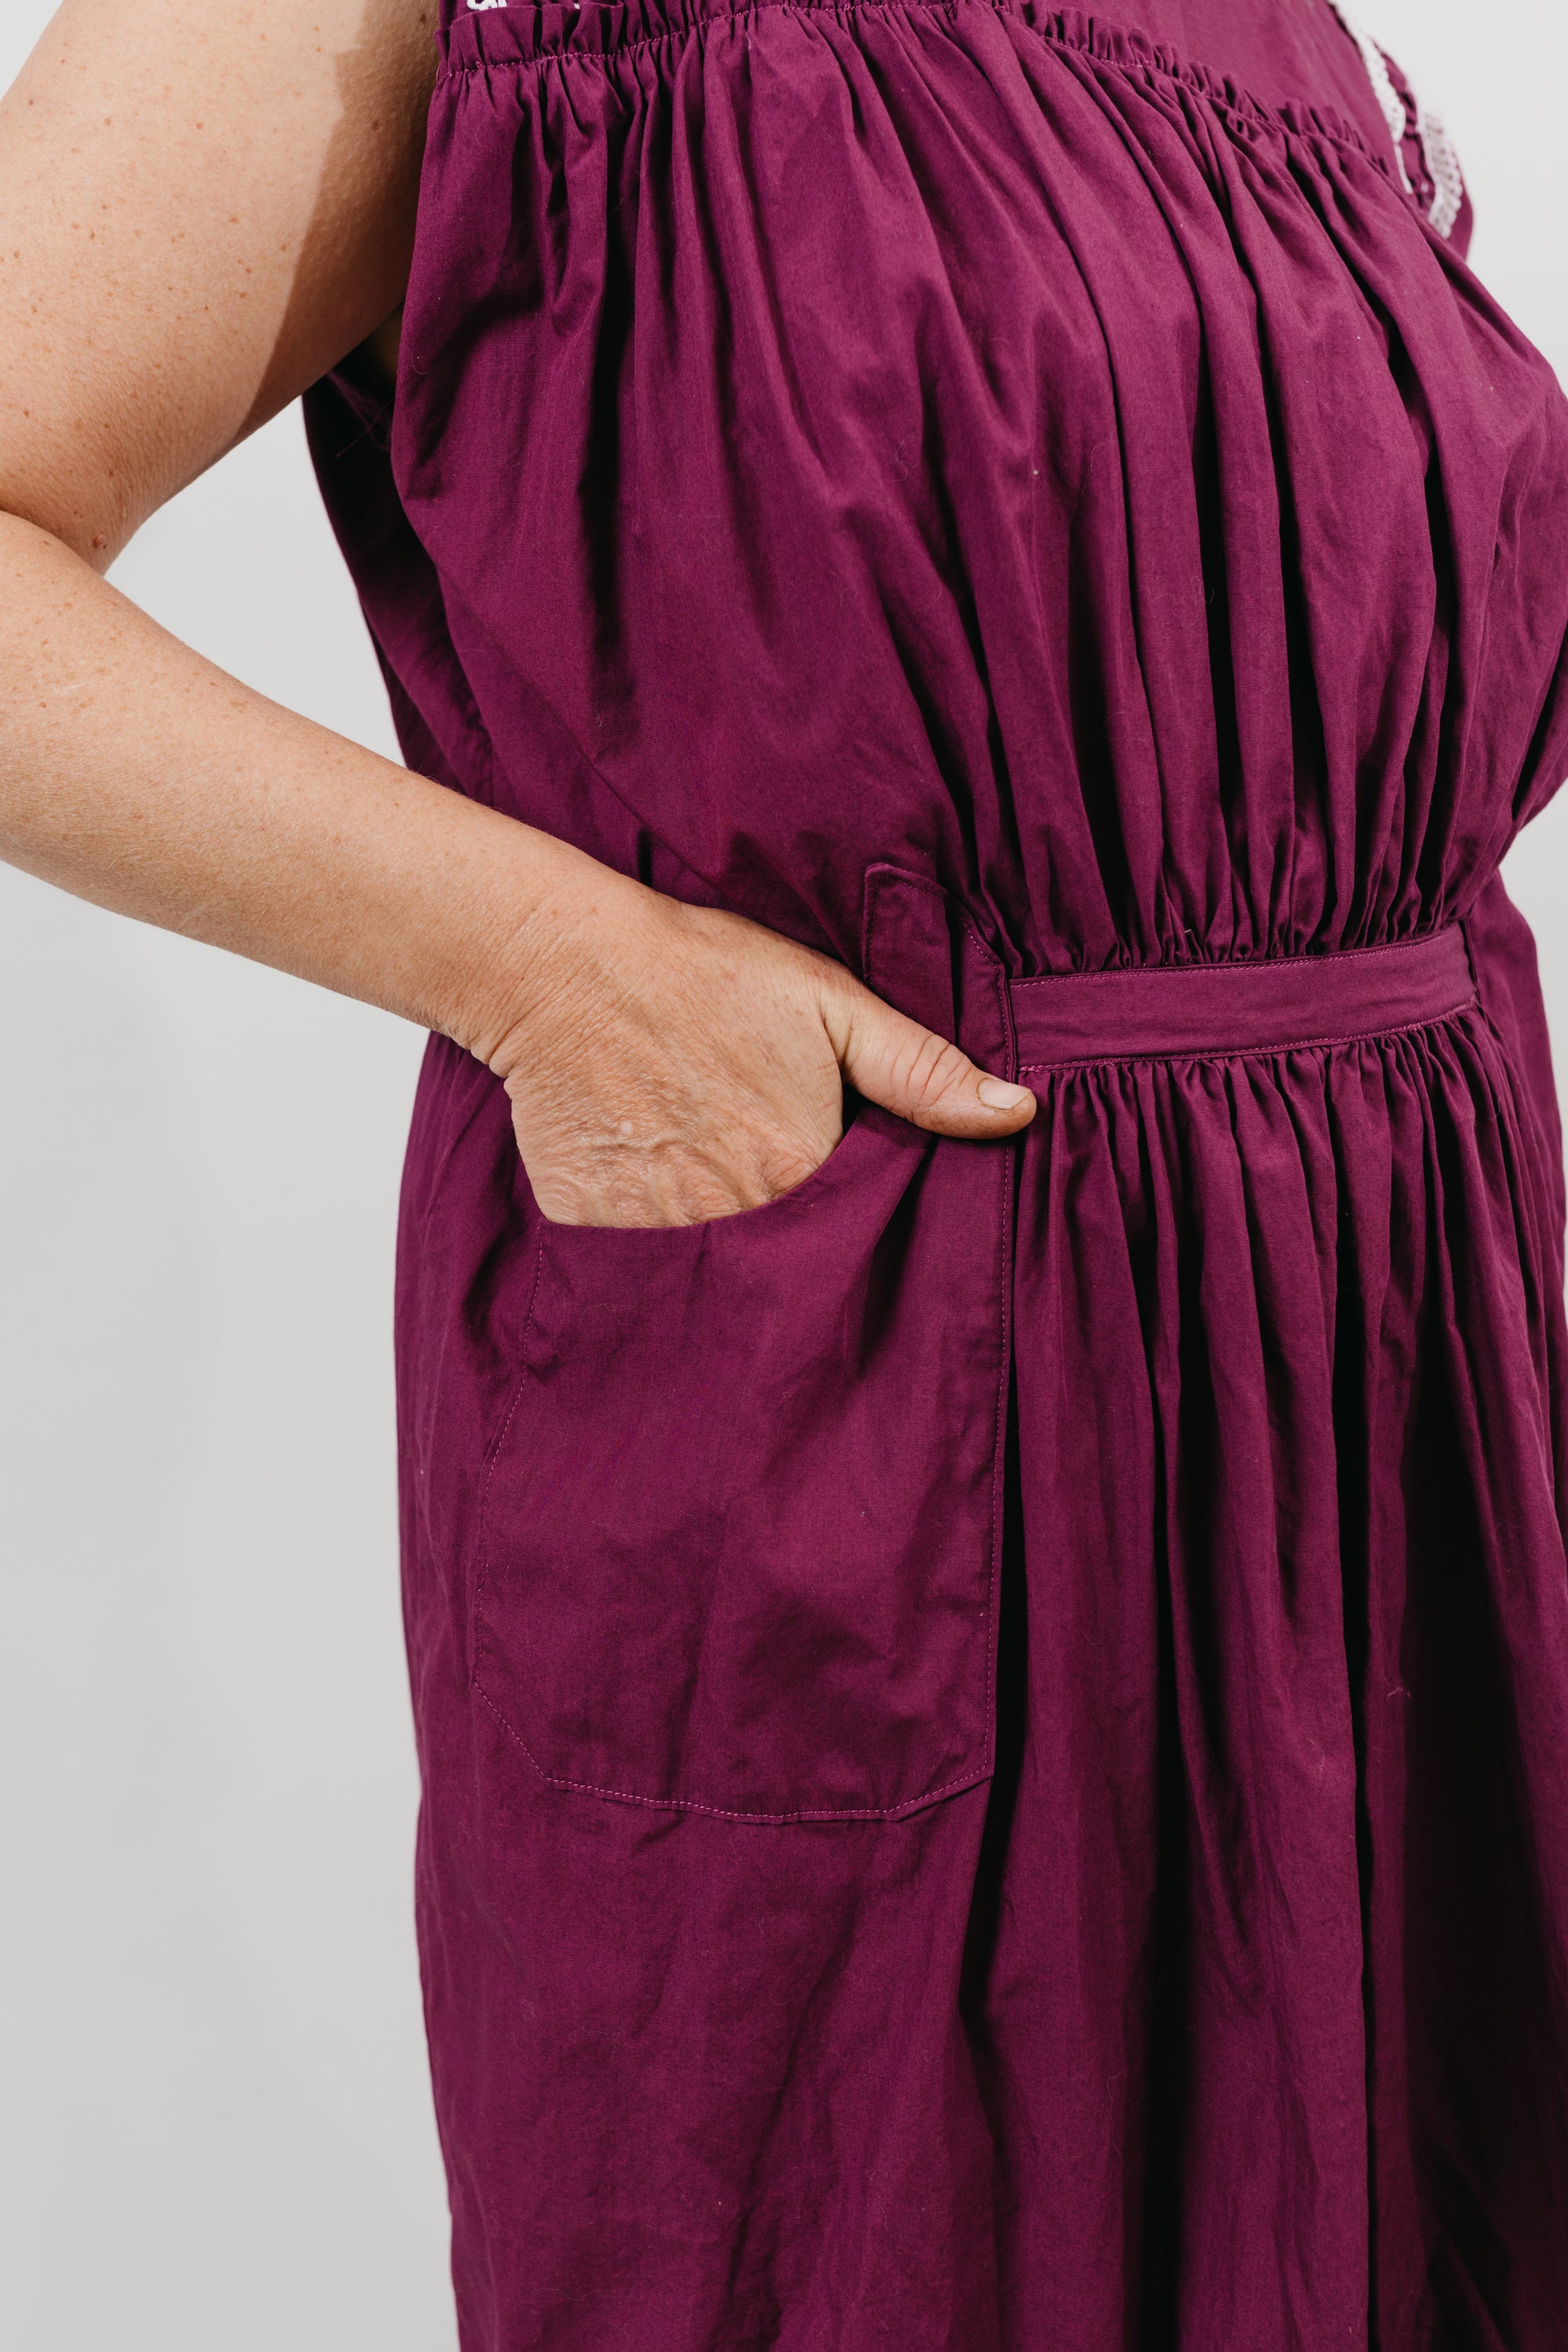 White woman wearing a purple sleeveless dress with embroidery at the shoulder yokes.  Standing in front of a white background.  Dress has pockets and is belted at the waist - close up of the pockets..